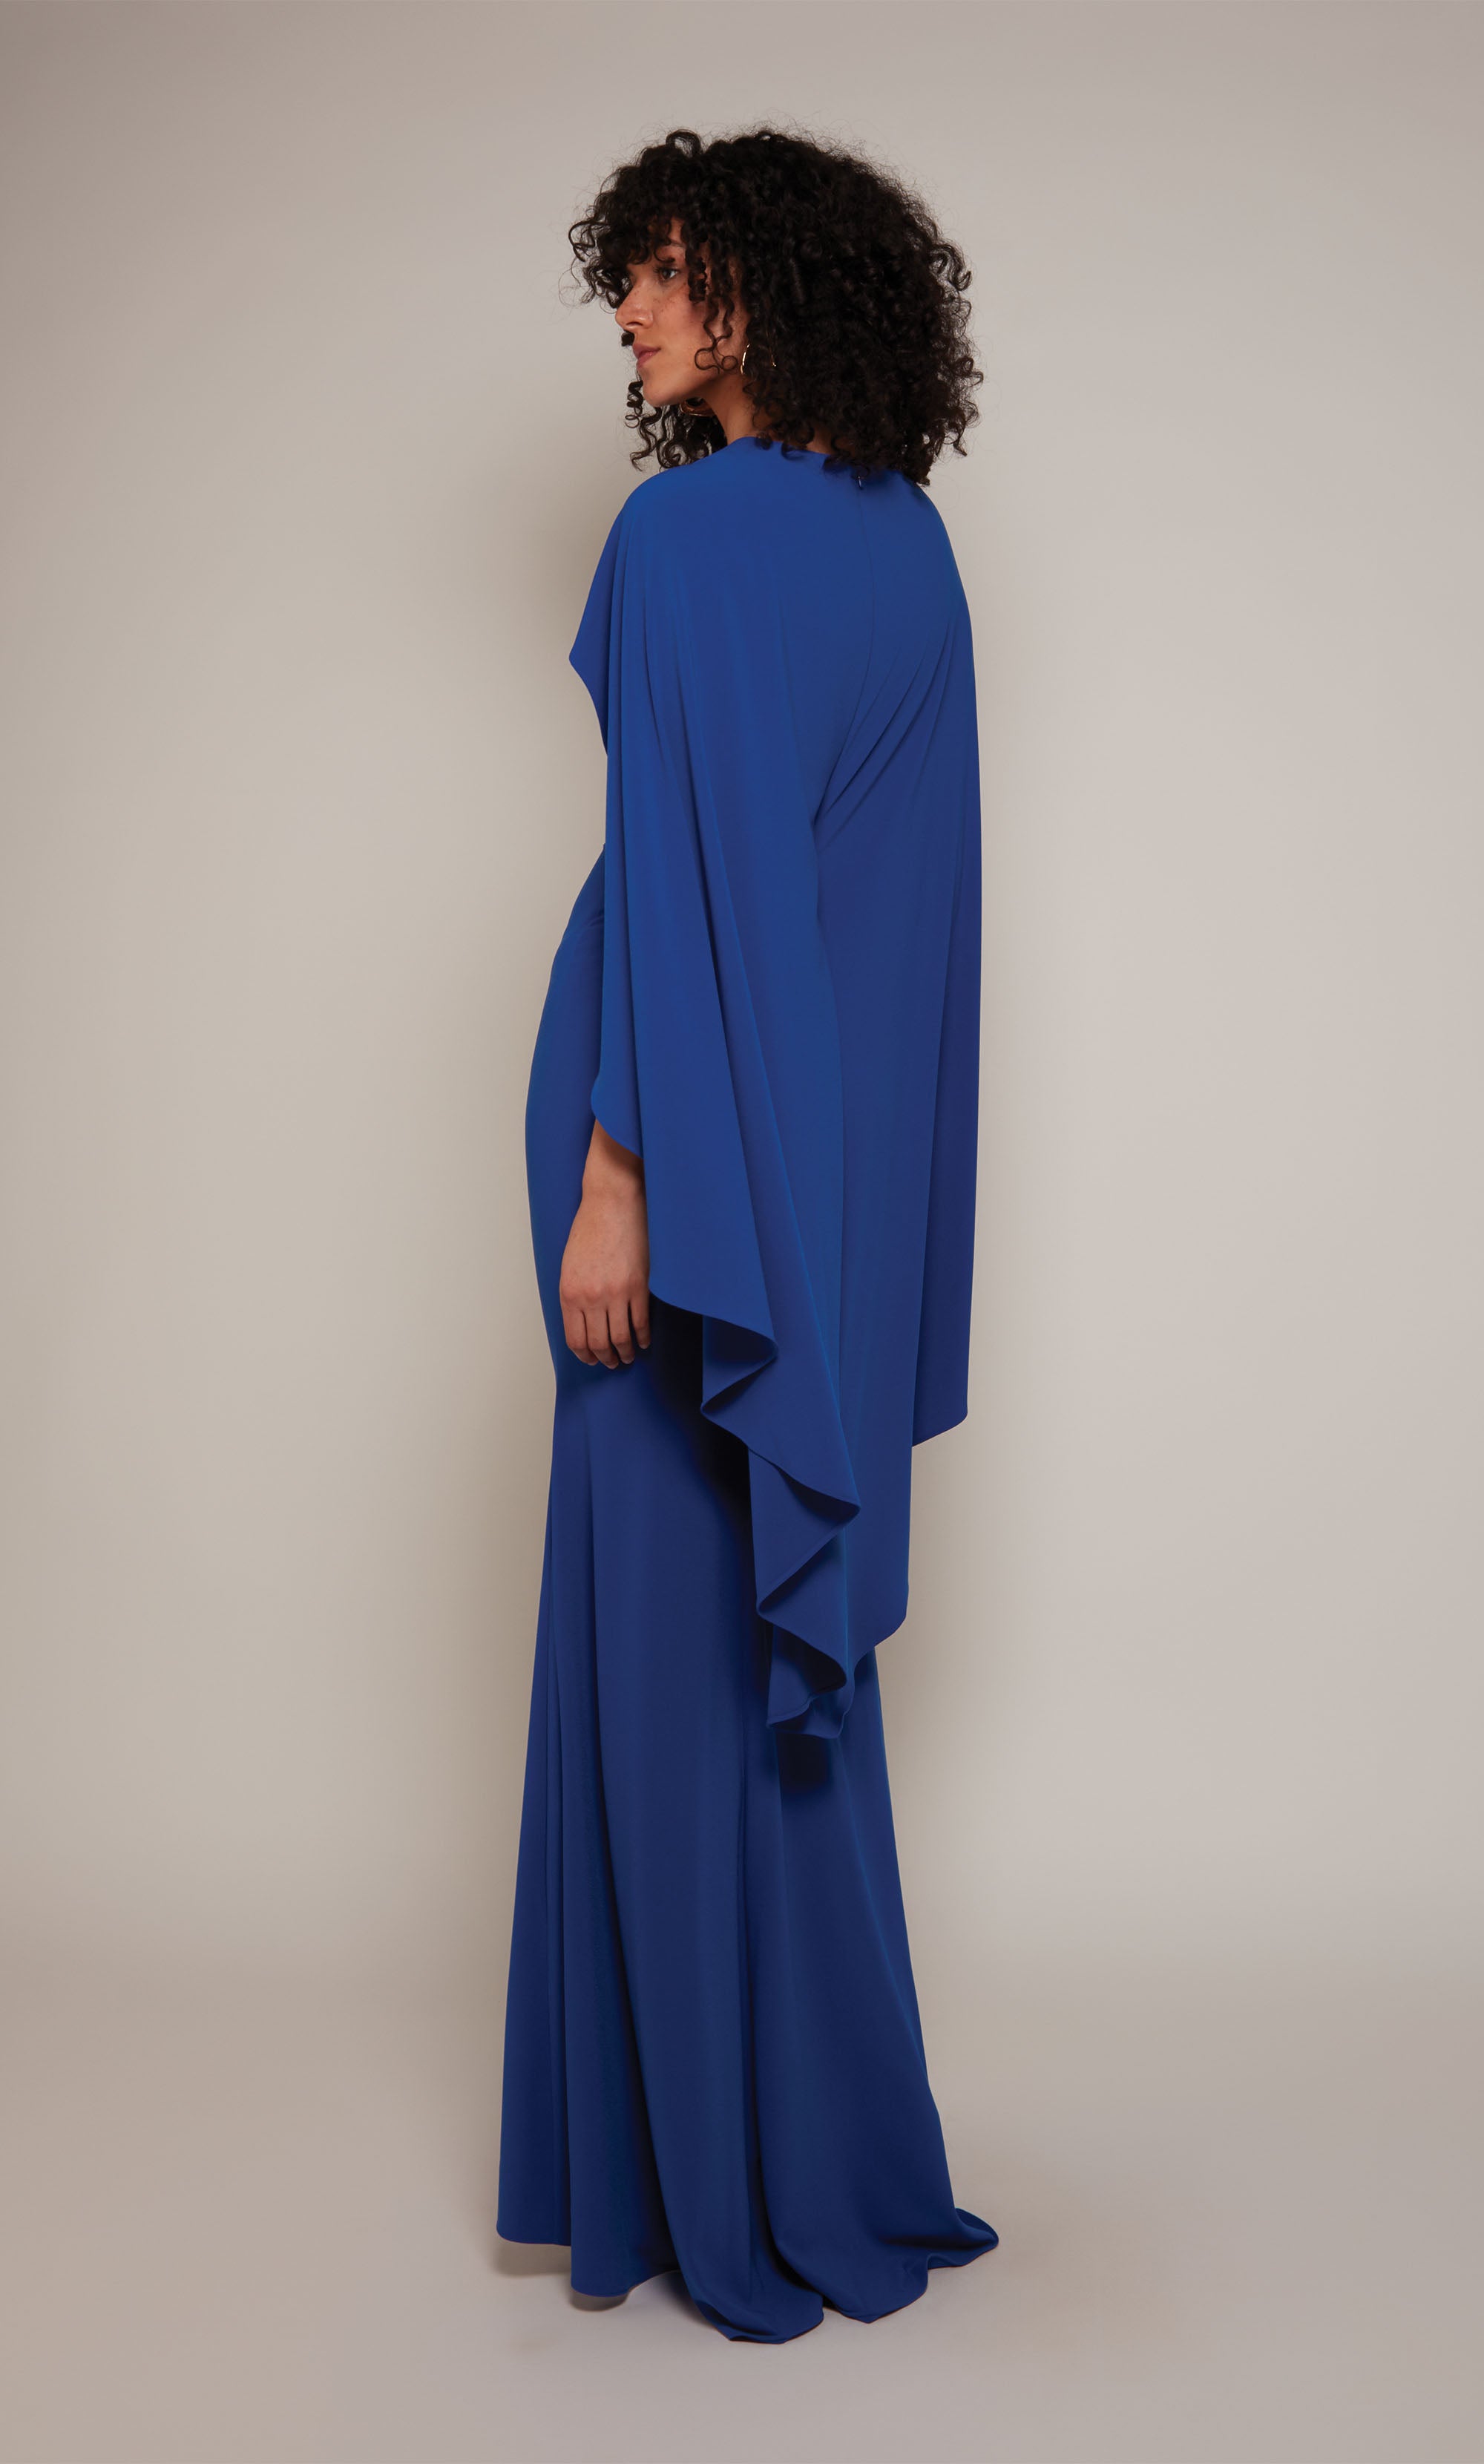 A long, fitted capelet dress with a front key hole and slightly flared skirt from knee to hemline in royal blue.